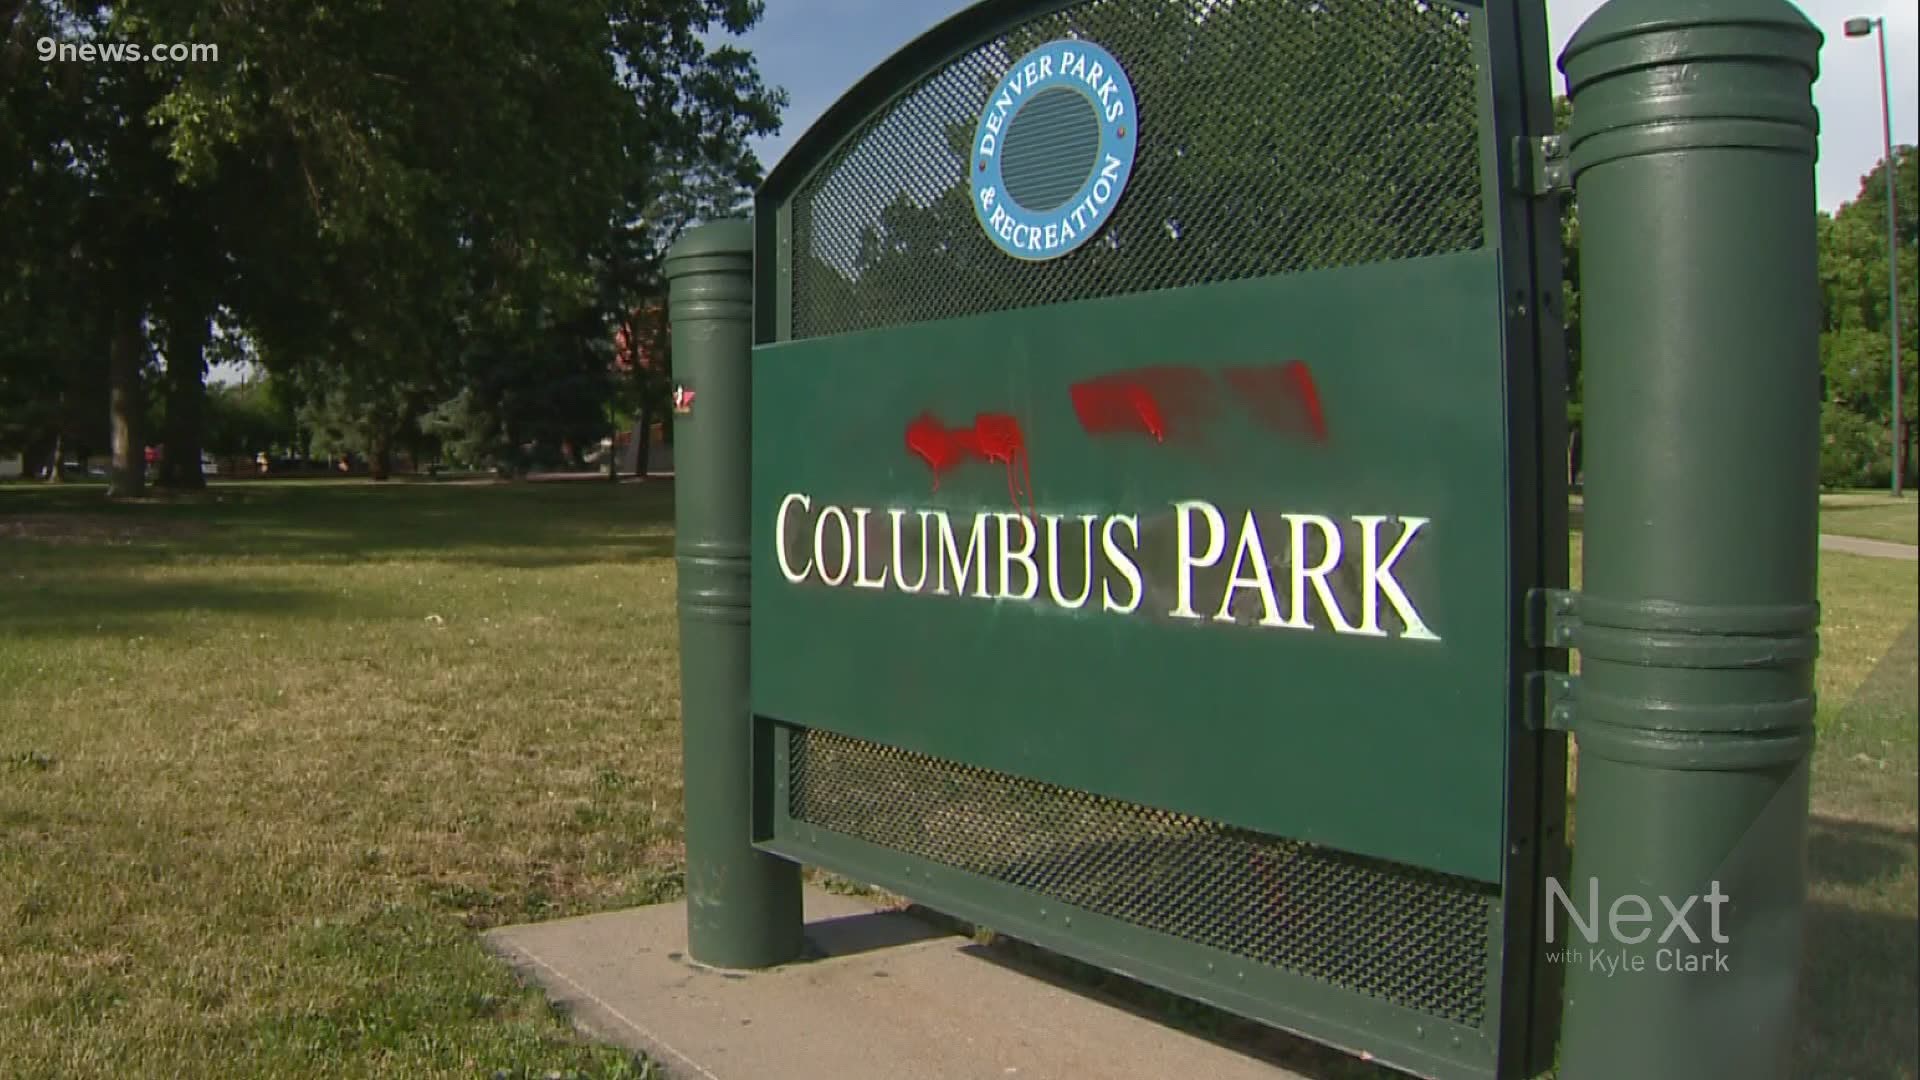 Organizers collected hundreds of signatures in hopes of changing the name of the park in the Sunnyside neighborhood.